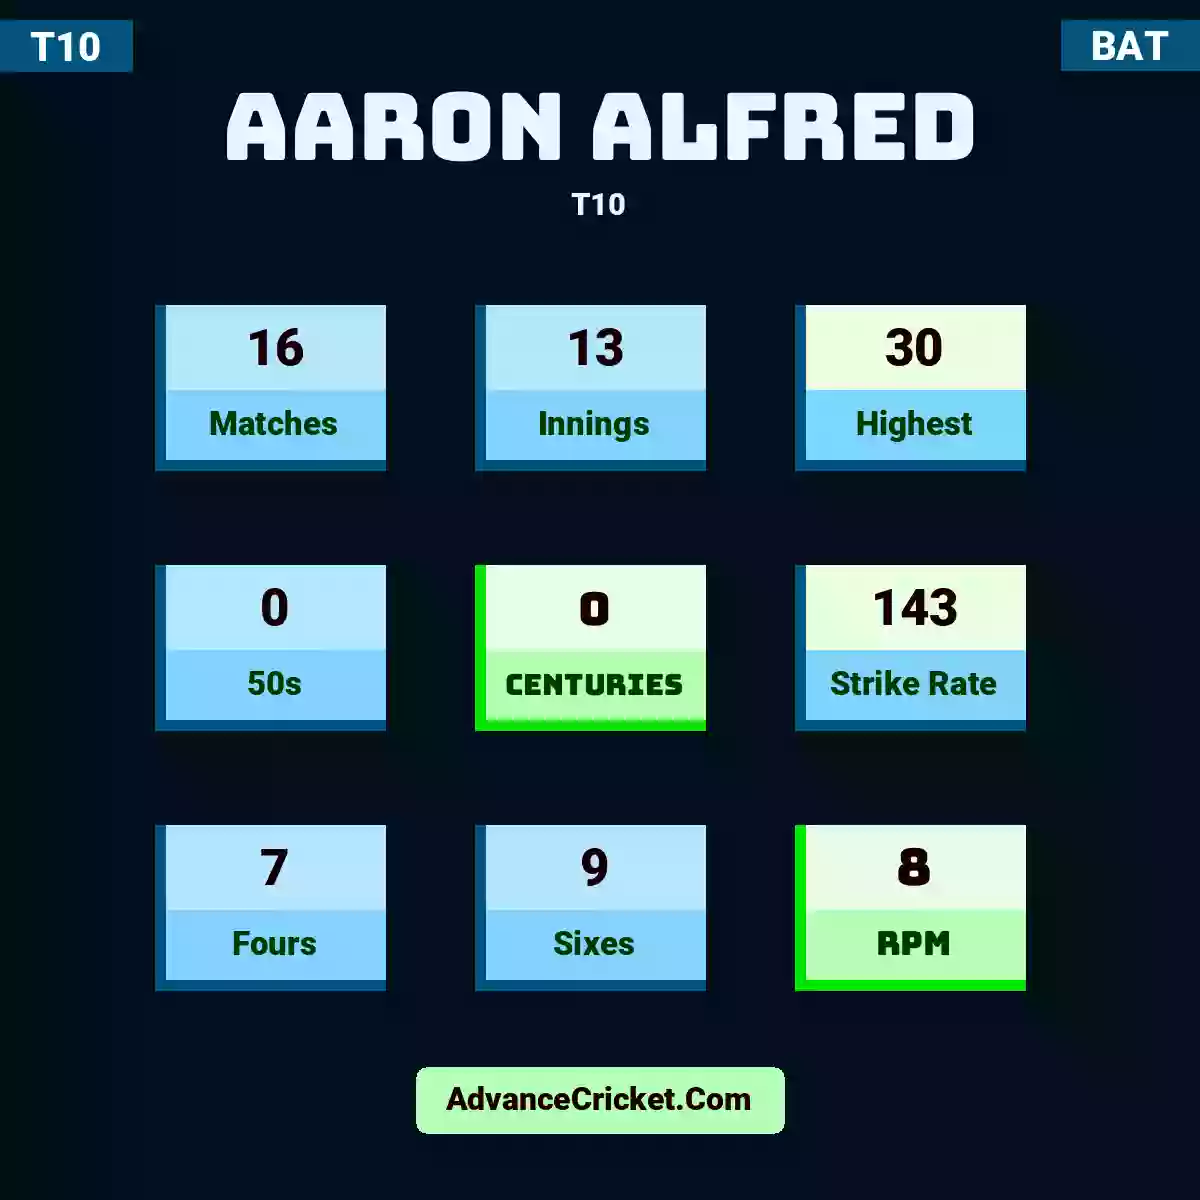 Aaron Alfred T10 , Aaron Alfred played 16 matches, scored 30 runs as highest, 0 half-centuries, and 0 centuries, with a strike rate of 143. a.alfred hit 7 fours and 9 sixes, with an RPM of 8.